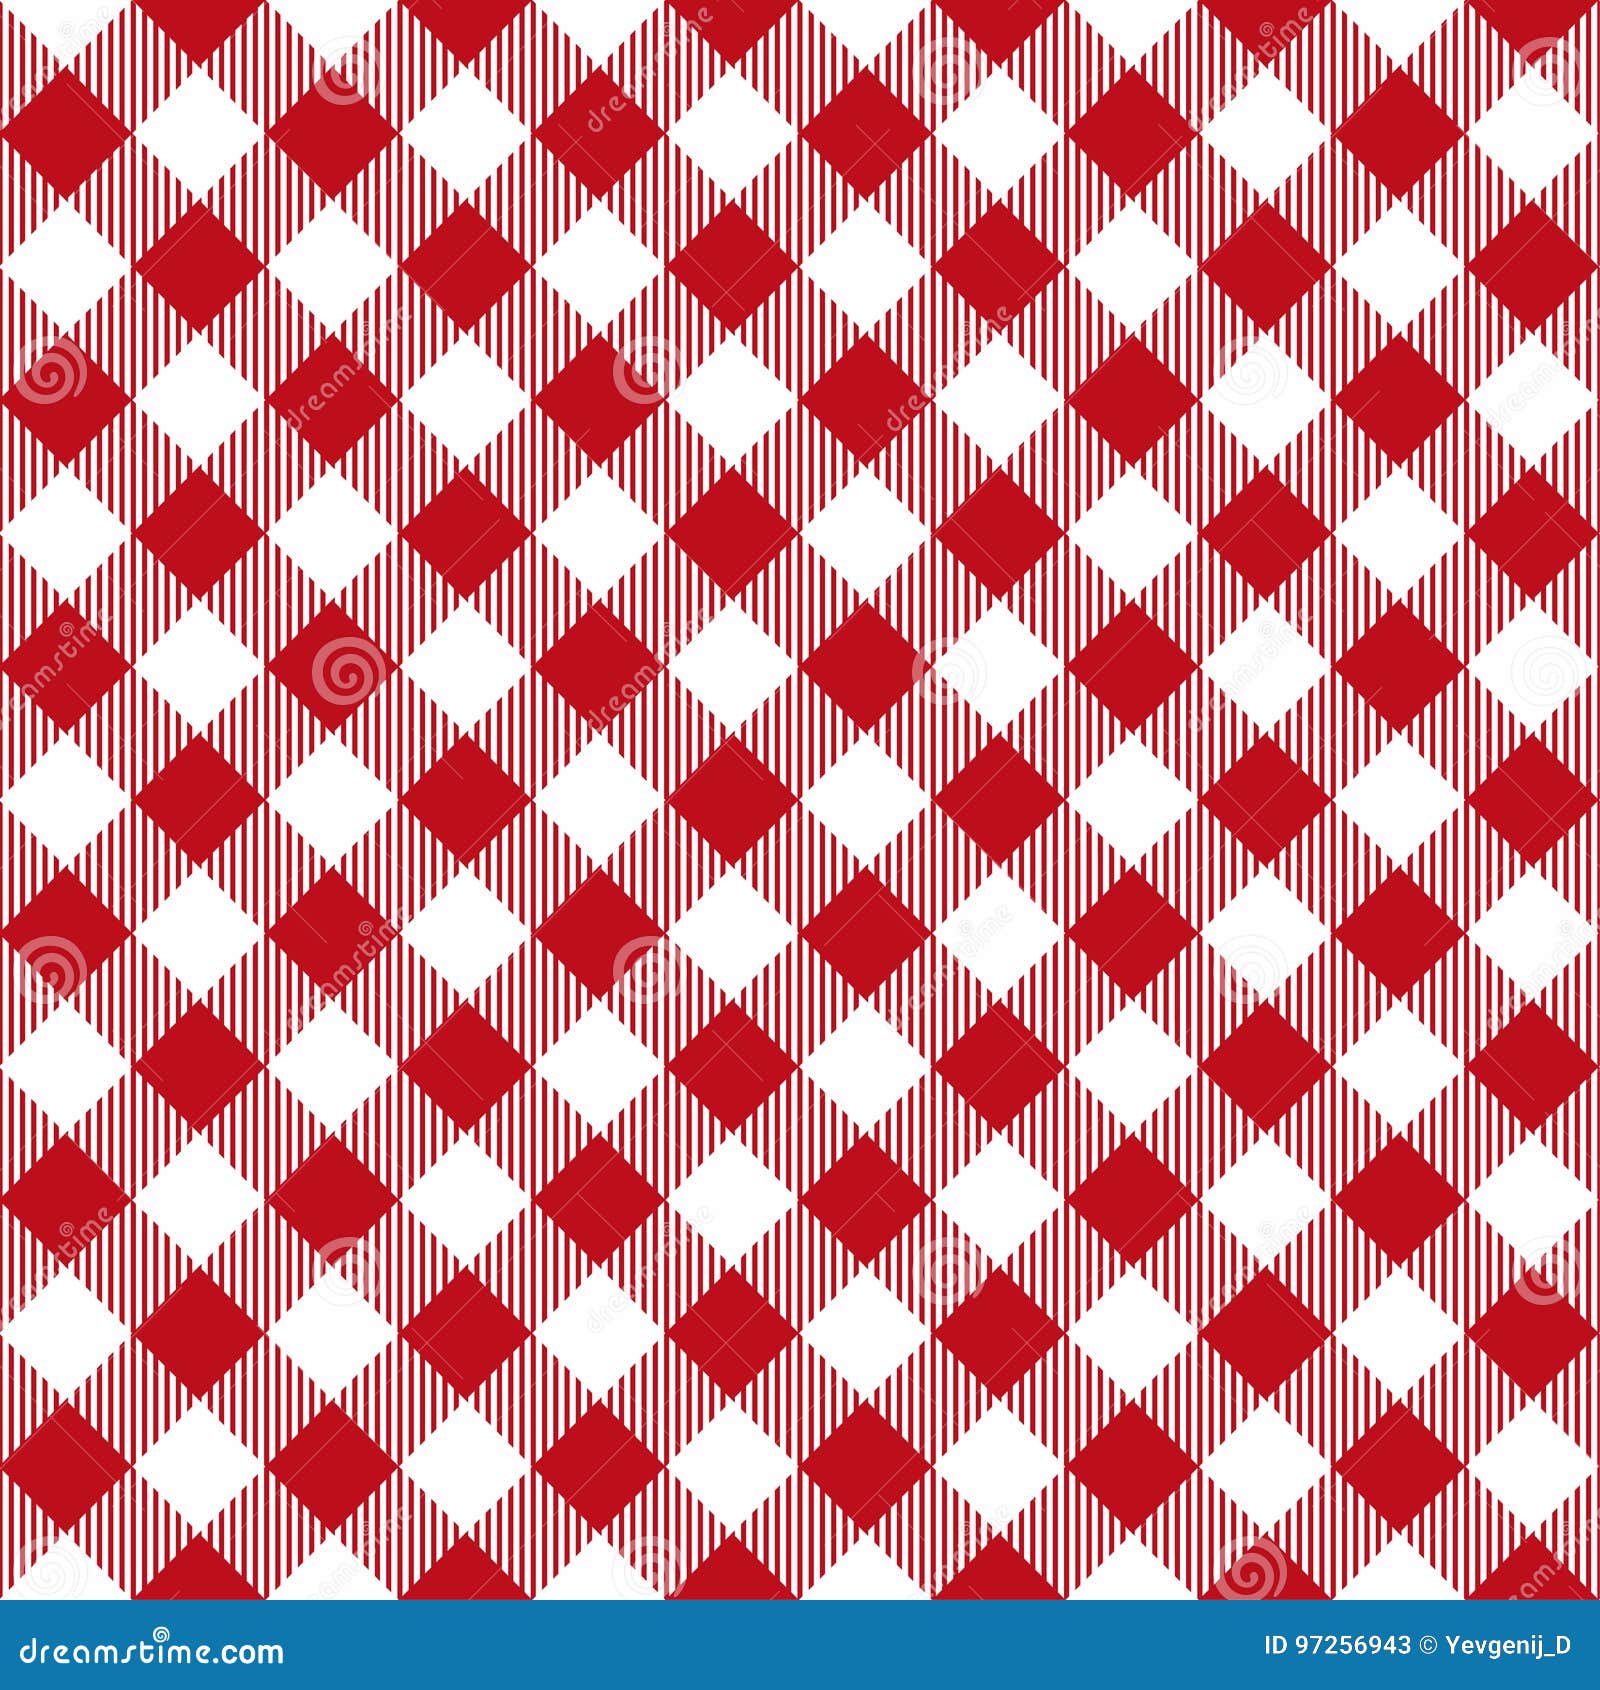 picnic table cloth seamless pattern. red picnic plaid texture